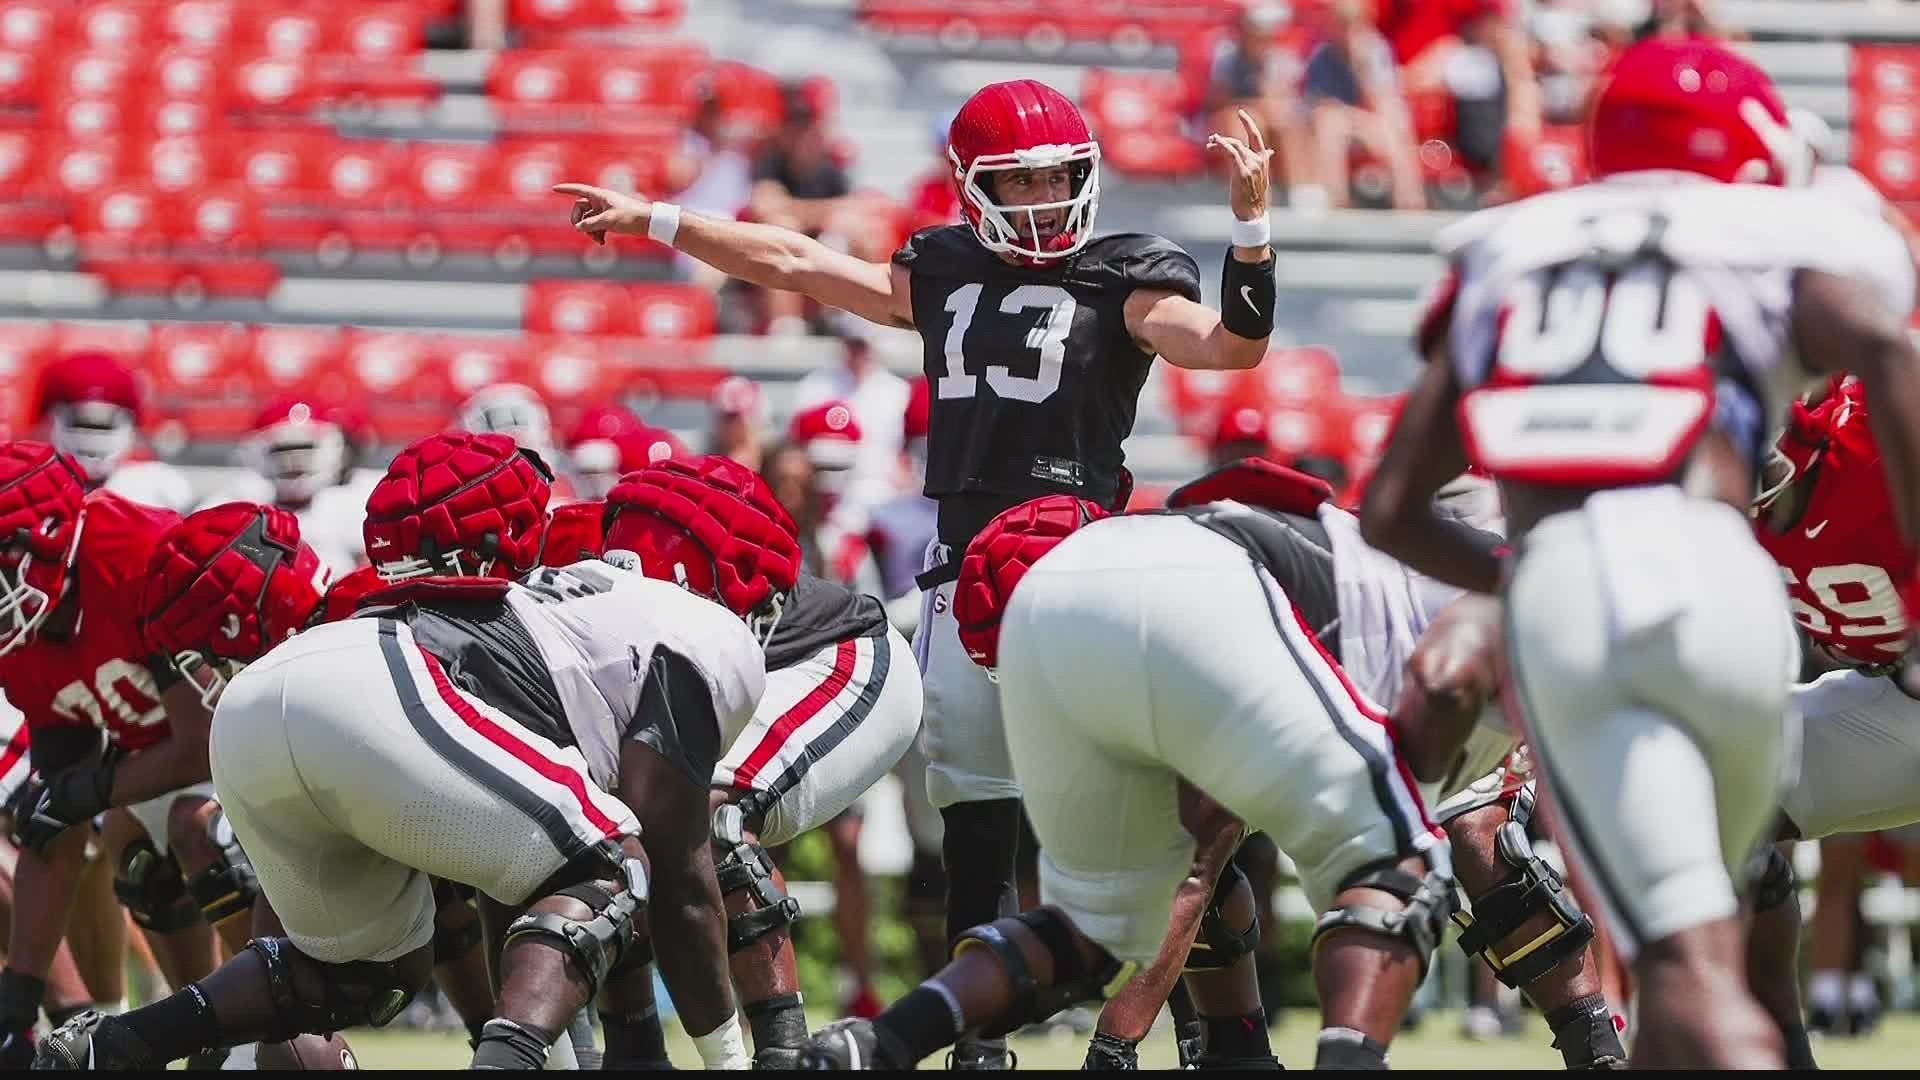 The Bulldogs finished their second fall scrimmage Saturday. Coach Kirby Smart said he saw some growth out of the leaders of his team on the field.